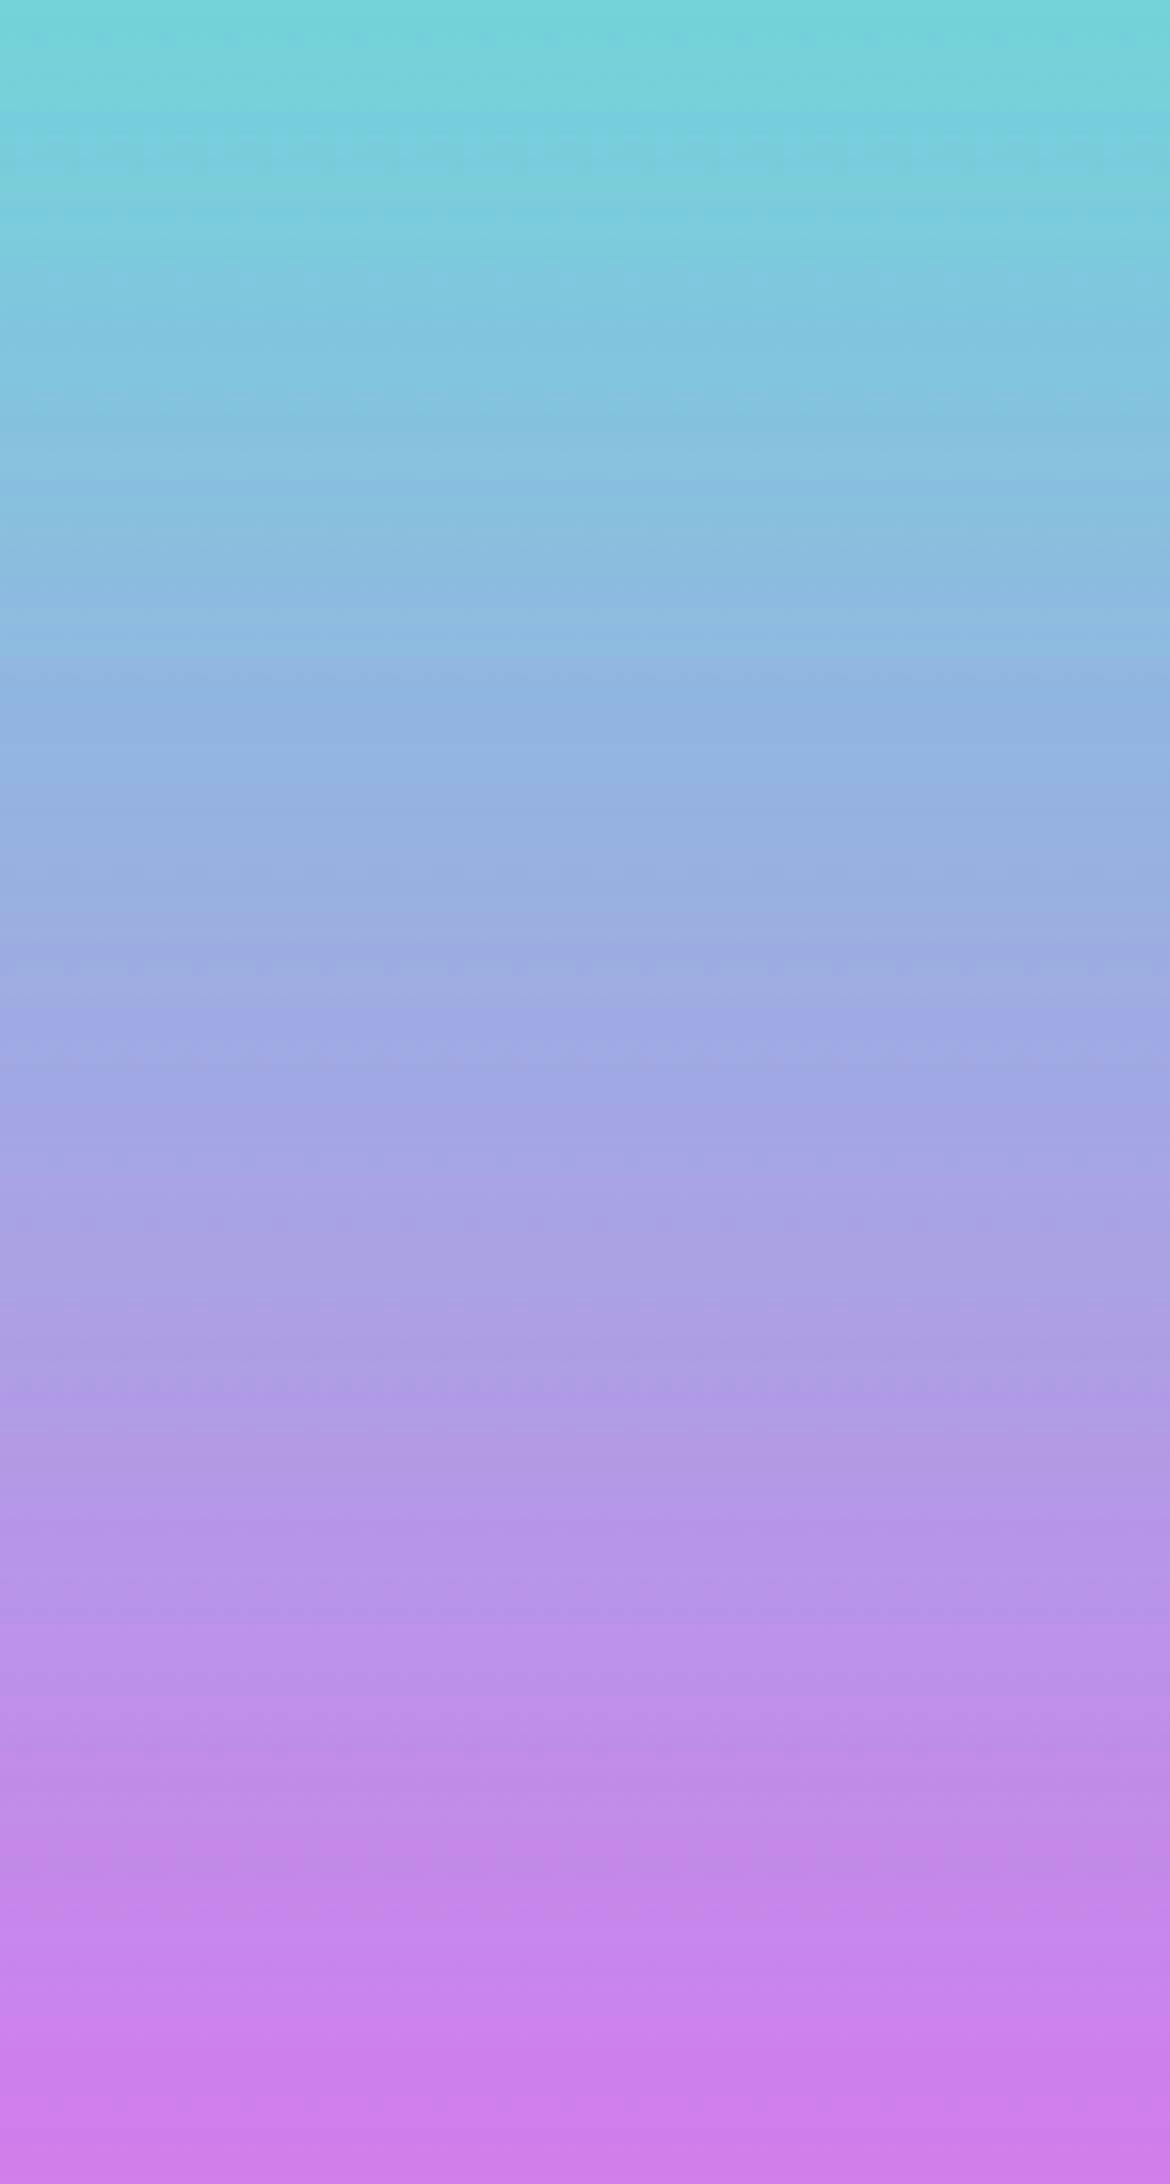  A blue to pink gradient